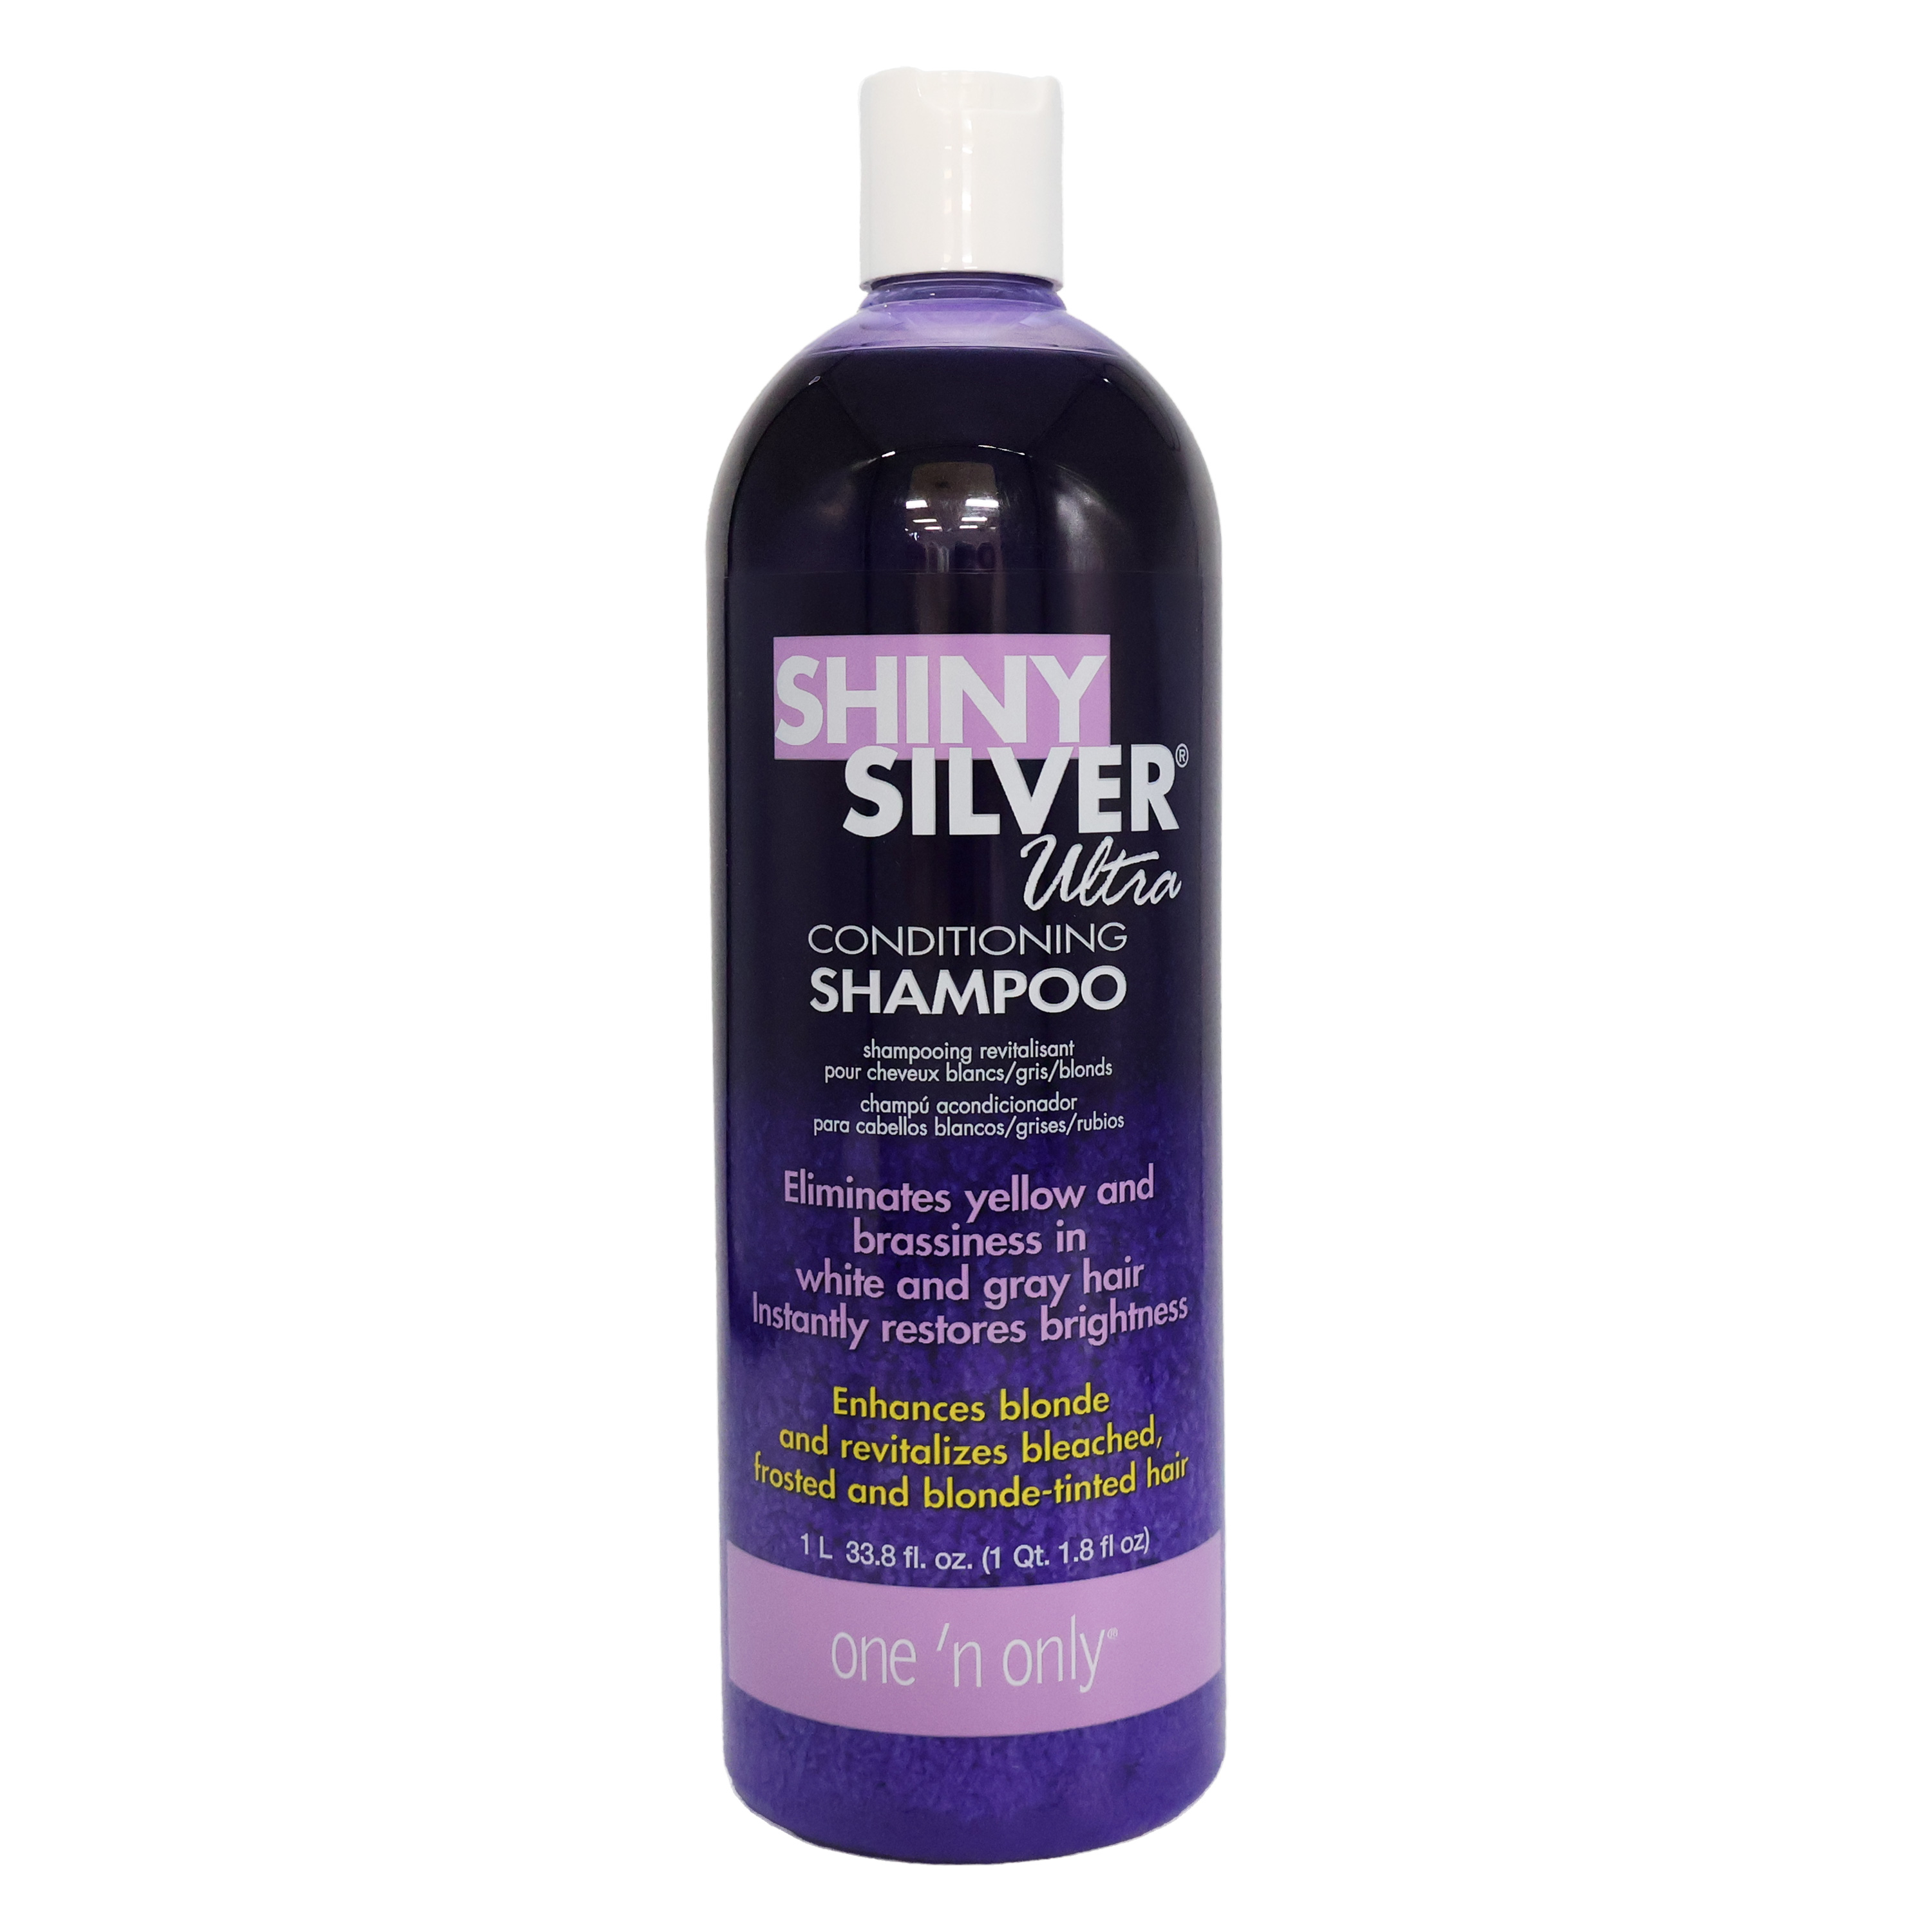 One N Only Shiny Silver Ultra Conditioning Shampoo, 33.8 Oz. - image 1 of 2